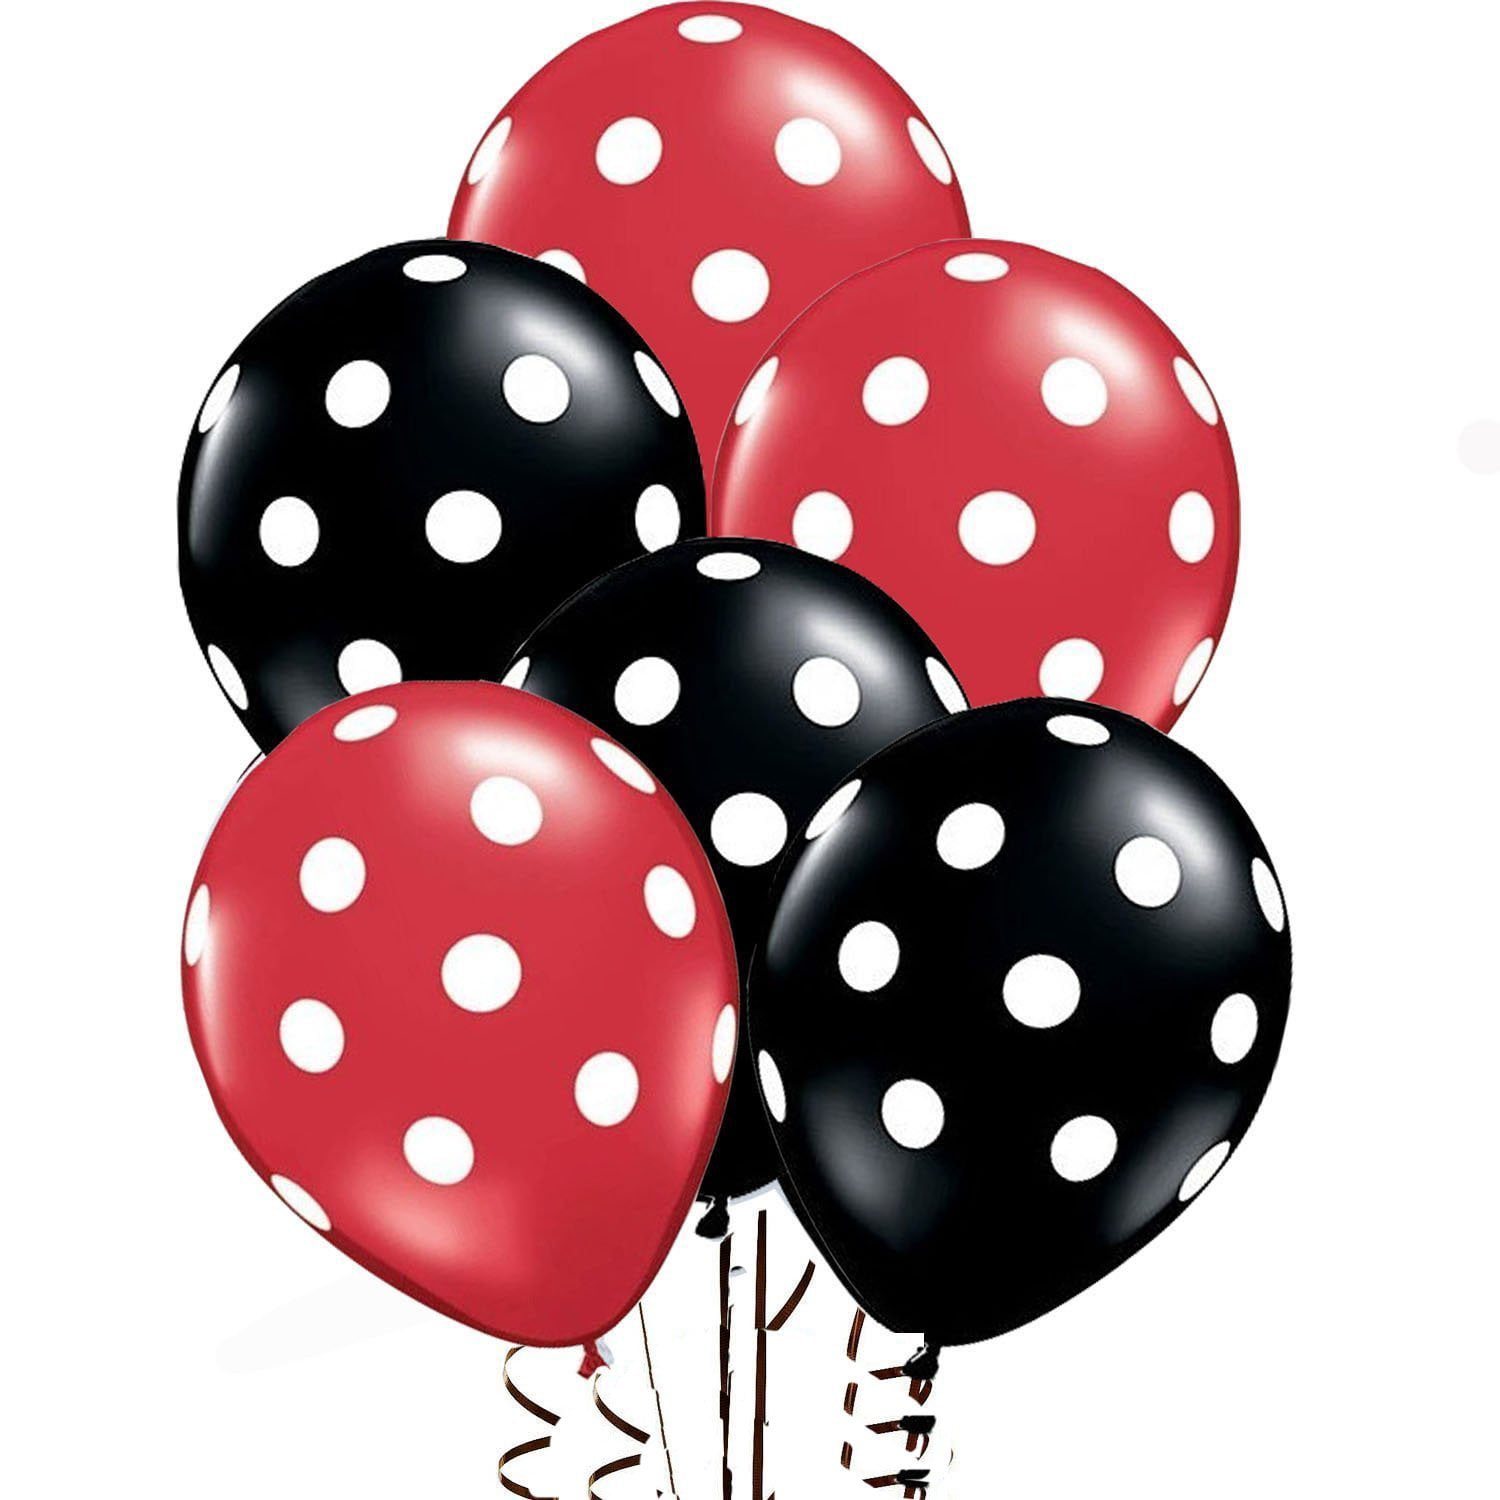 10 pc 11" Qualatex Big Polka Dot Red with Black Latex Balloon Party Decoration